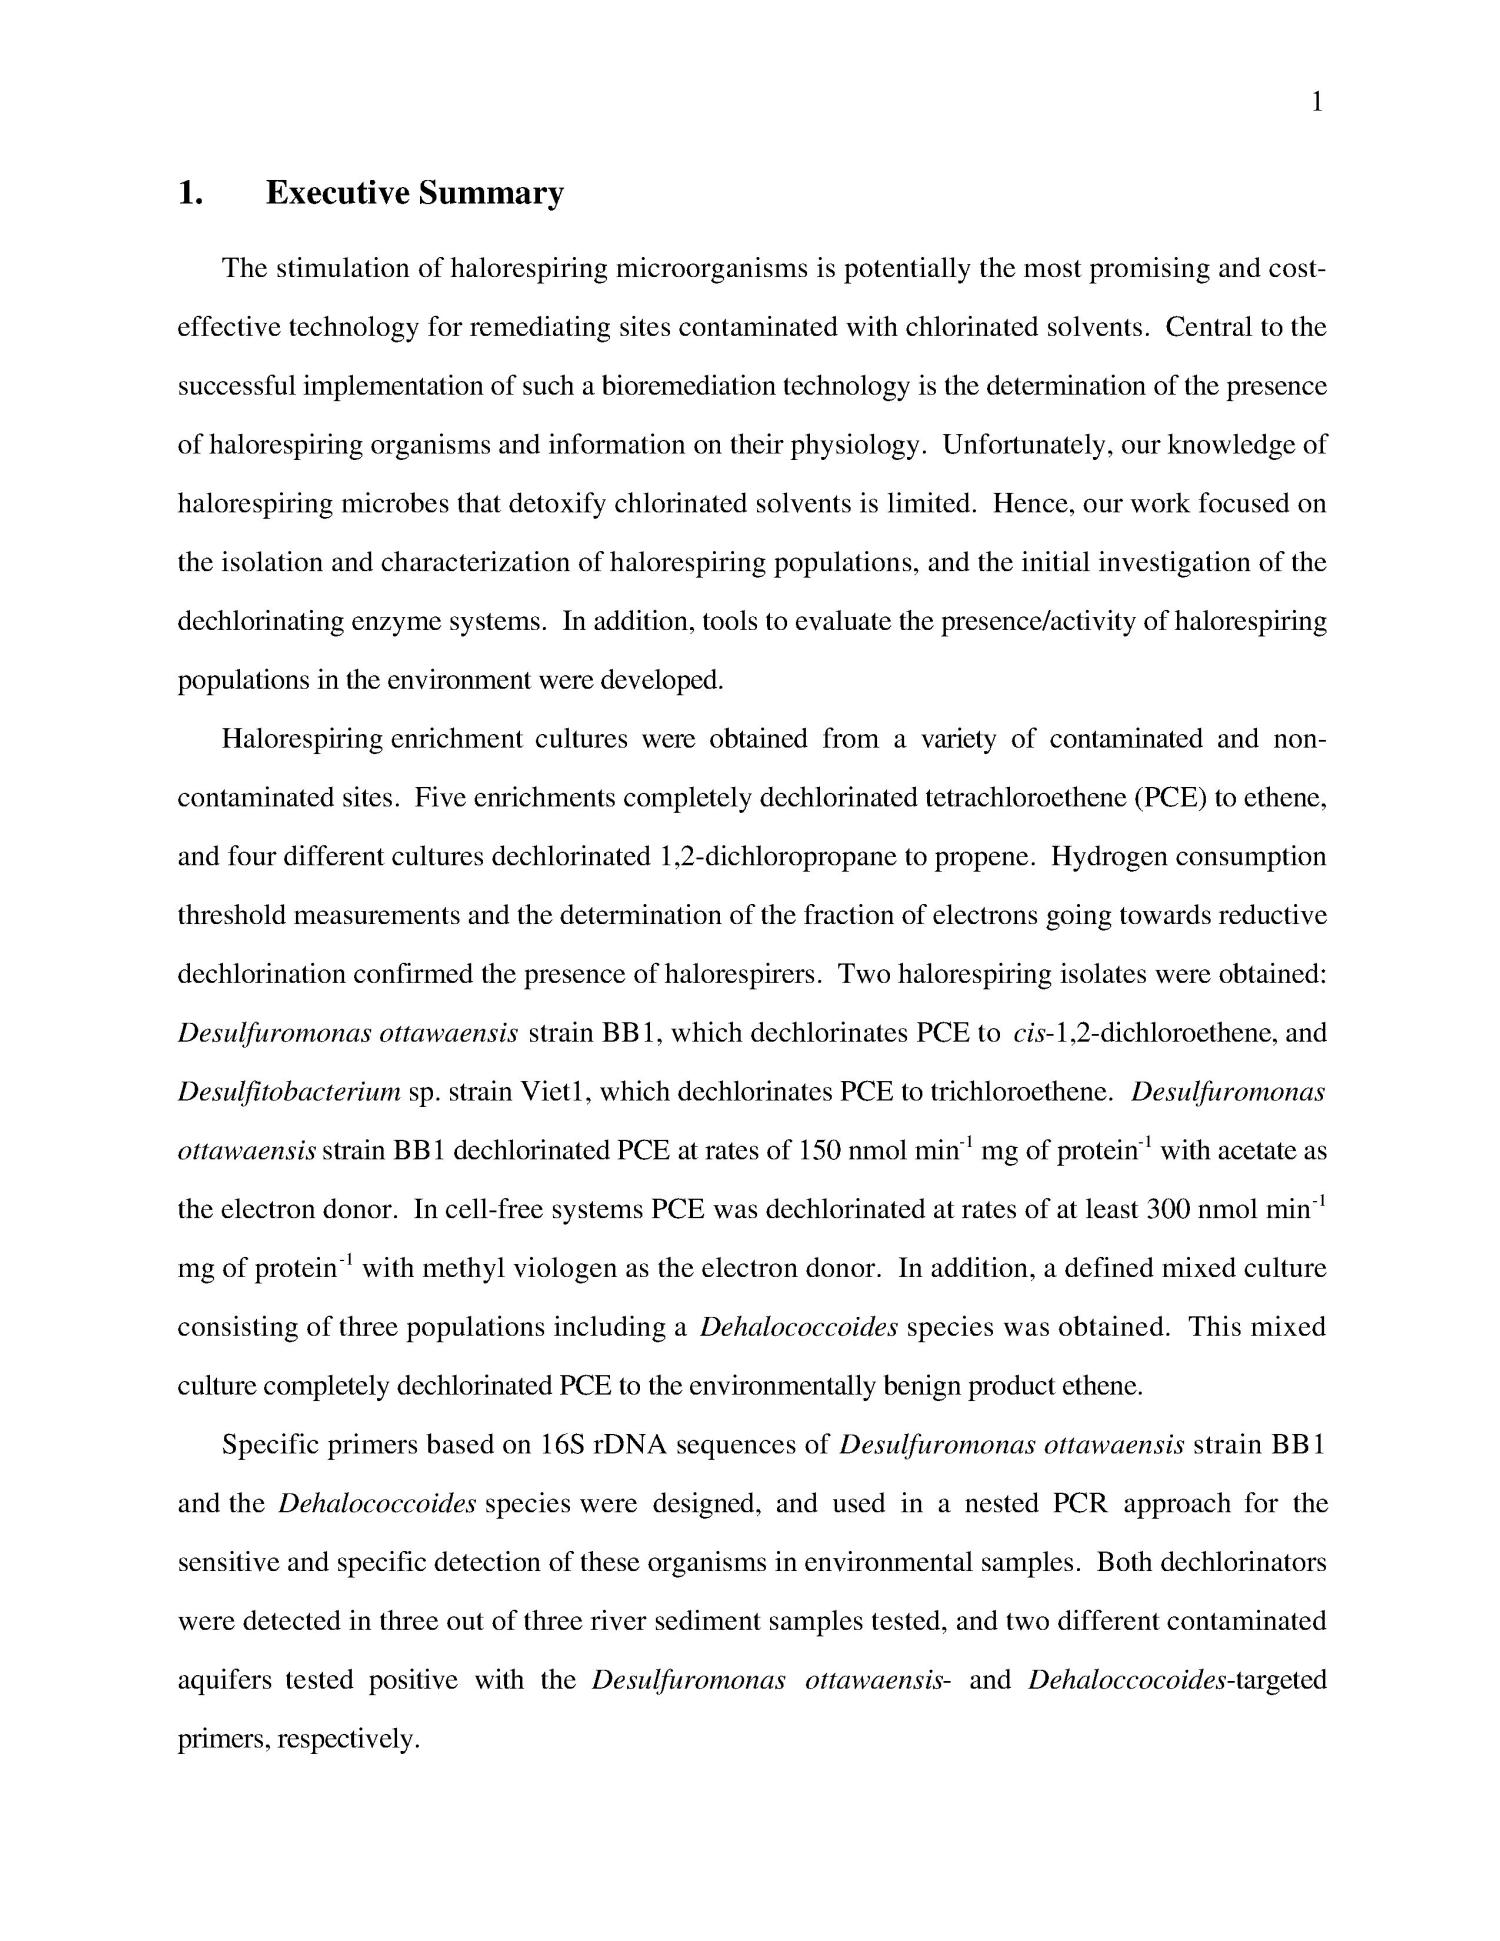 Complete Detoxification of Short Chain Chlorinated Aliphatic Compounds: Isolation of Halorespiring Organisms and Biochemical Studies of the Dehalogenating Enzyme Systems - Final Report
                                                
                                                    [Sequence #]: 3 of 21
                                                